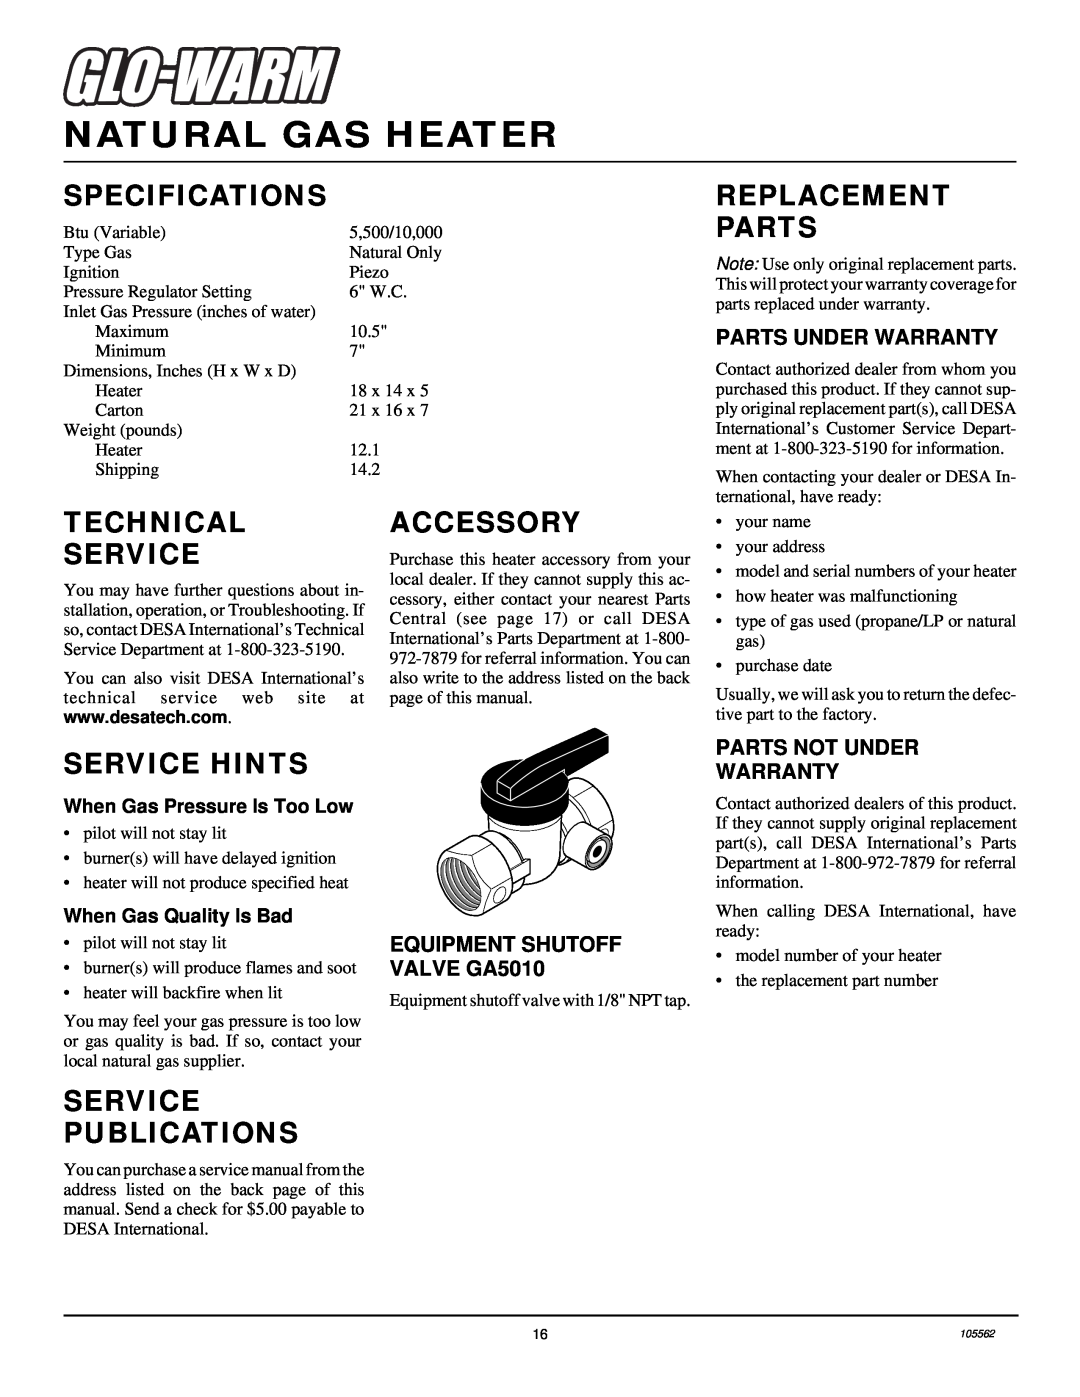 Desa FA-2B Specifications, Replacement Parts, Technical Service, Accessory, Service Hints, Service Publications 